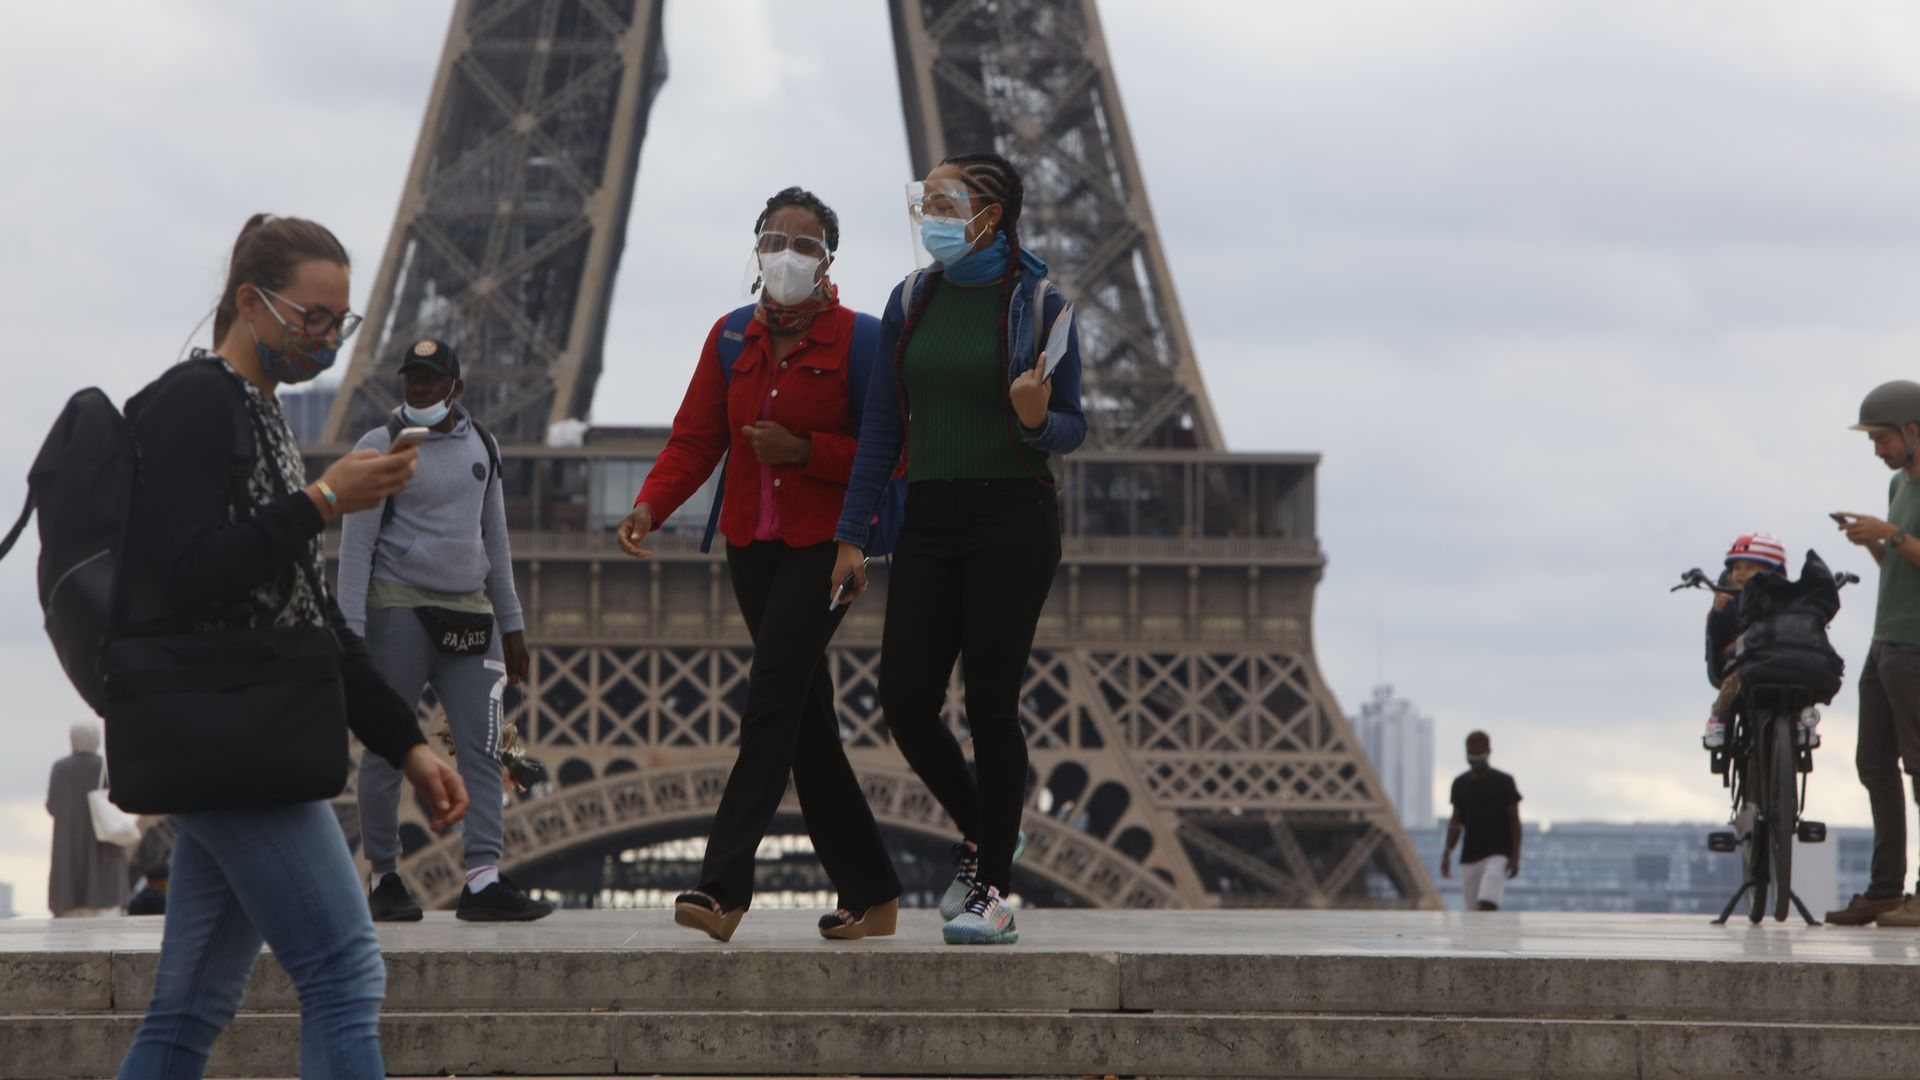 People wearing face masks walk on the Trocadero esplanade, a front the Eiffel Tower in Paris, France